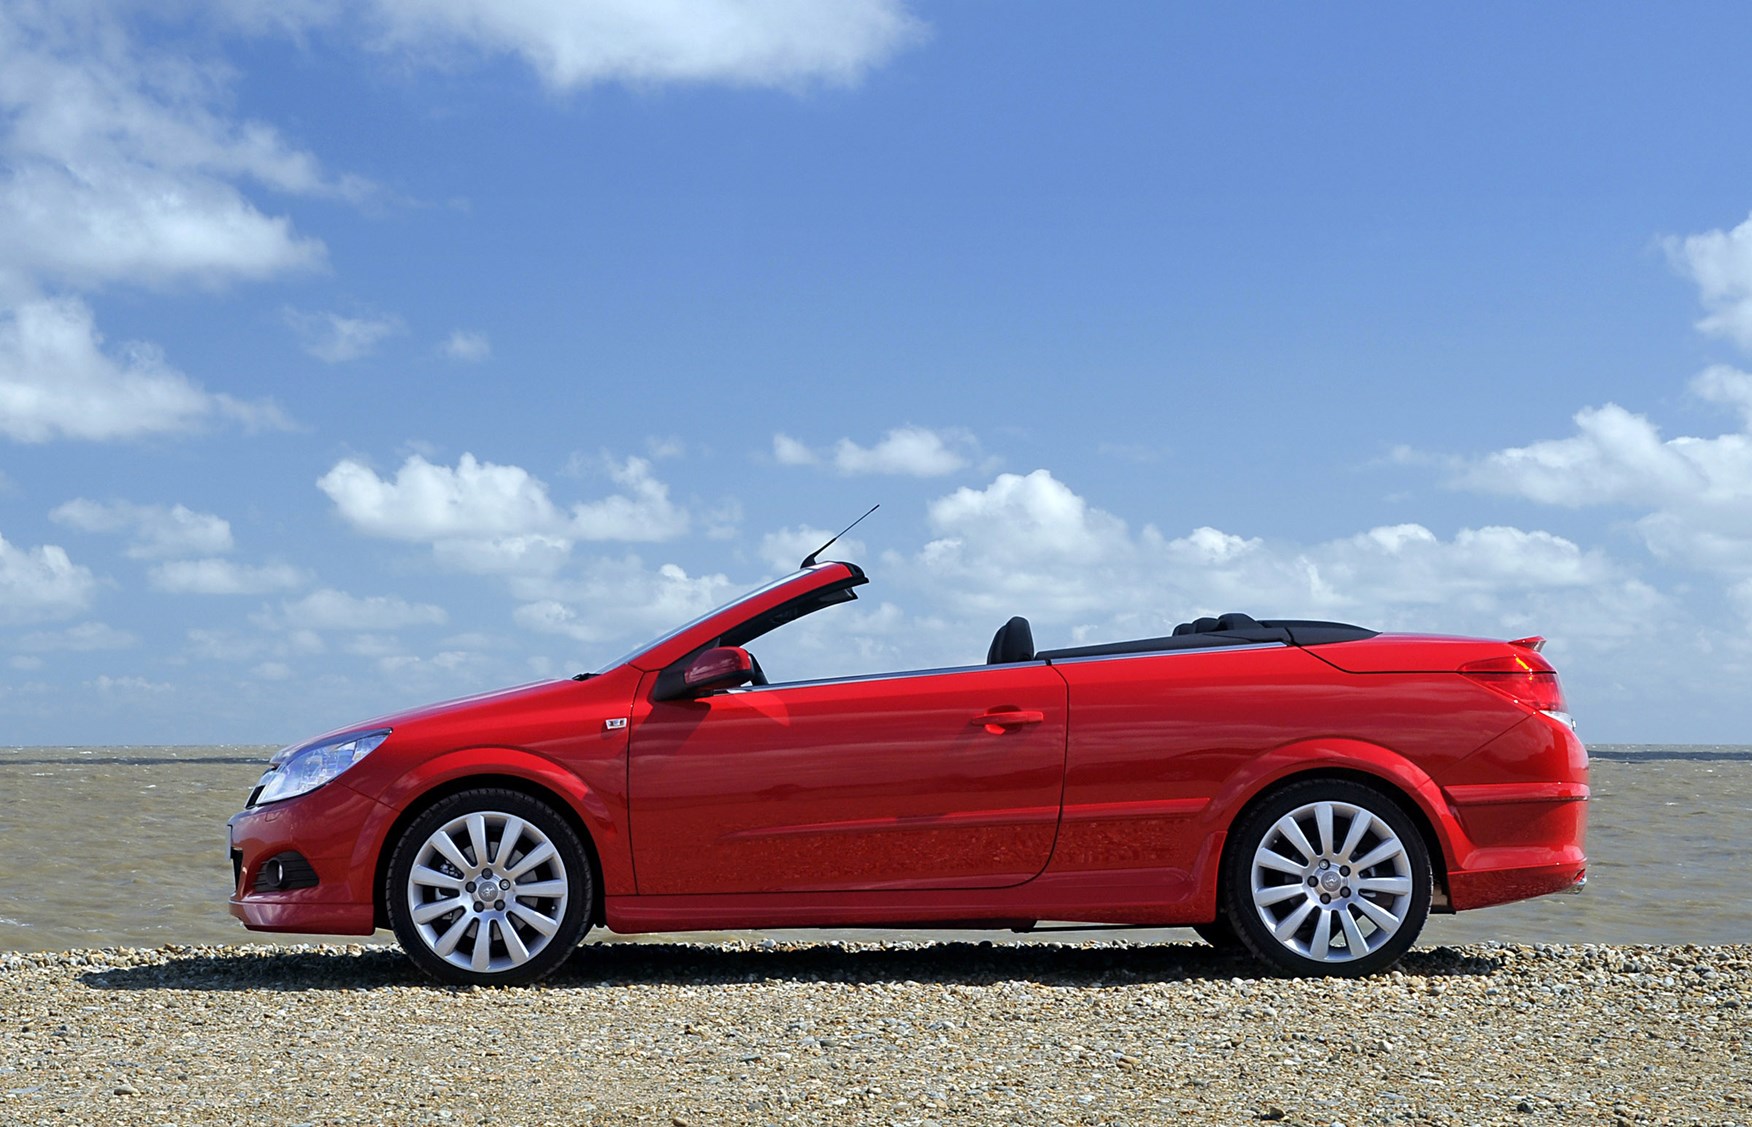 Vauxhall Astra H 04 10 Cabriolet Outstanding Cars